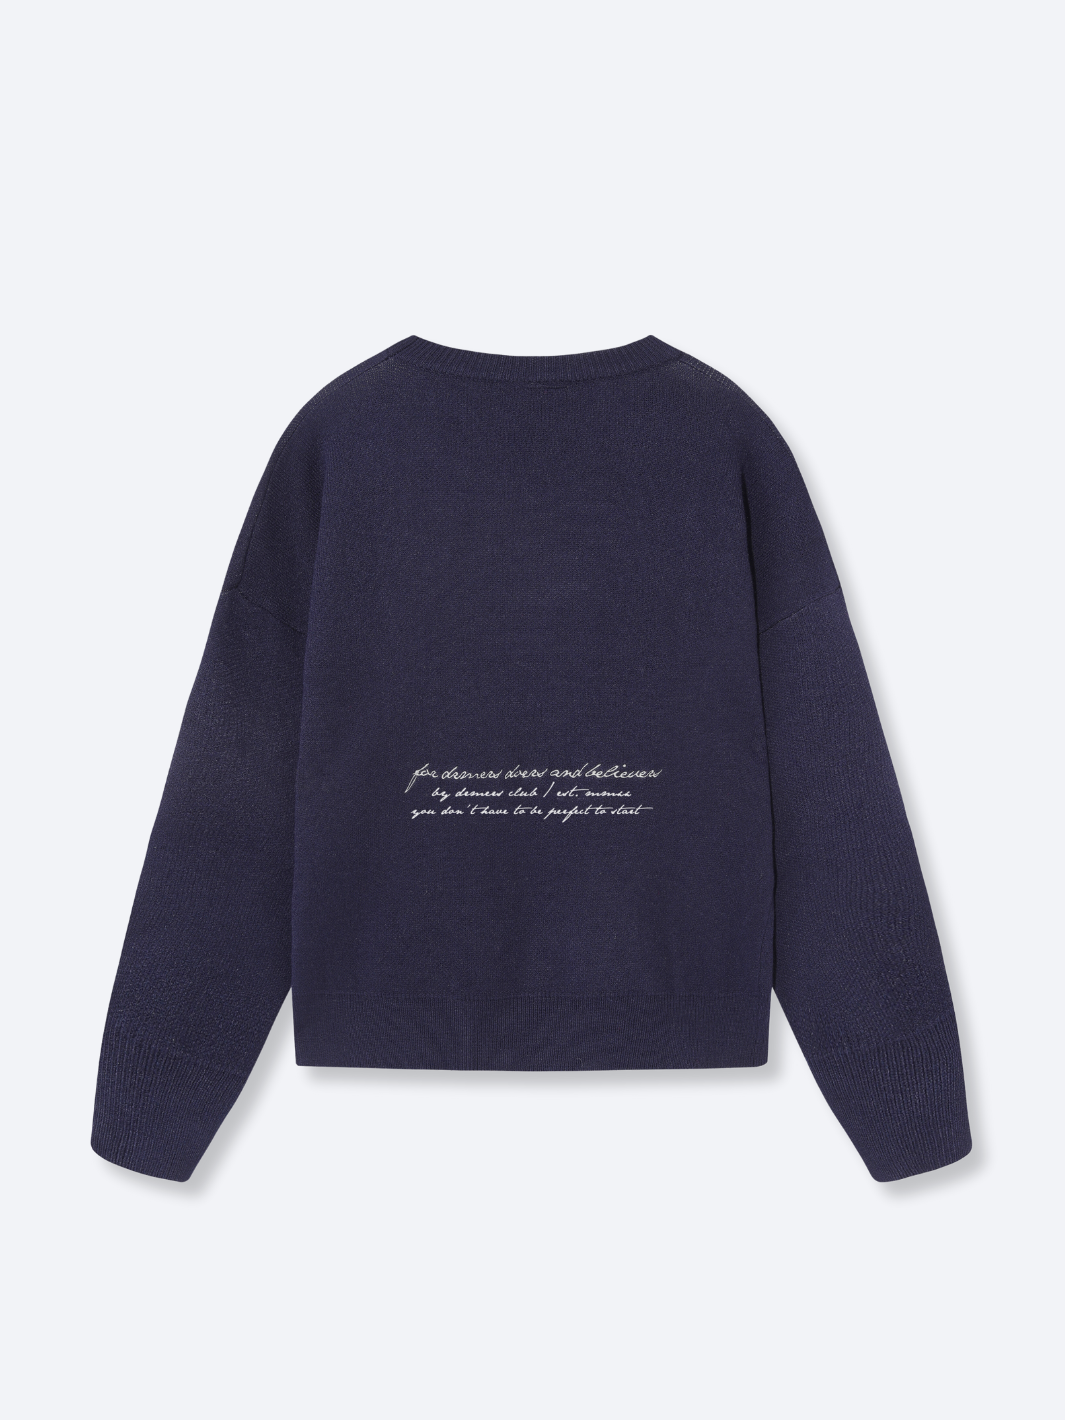 FREEFALL SMILEY KNIT - NAVY BLUE